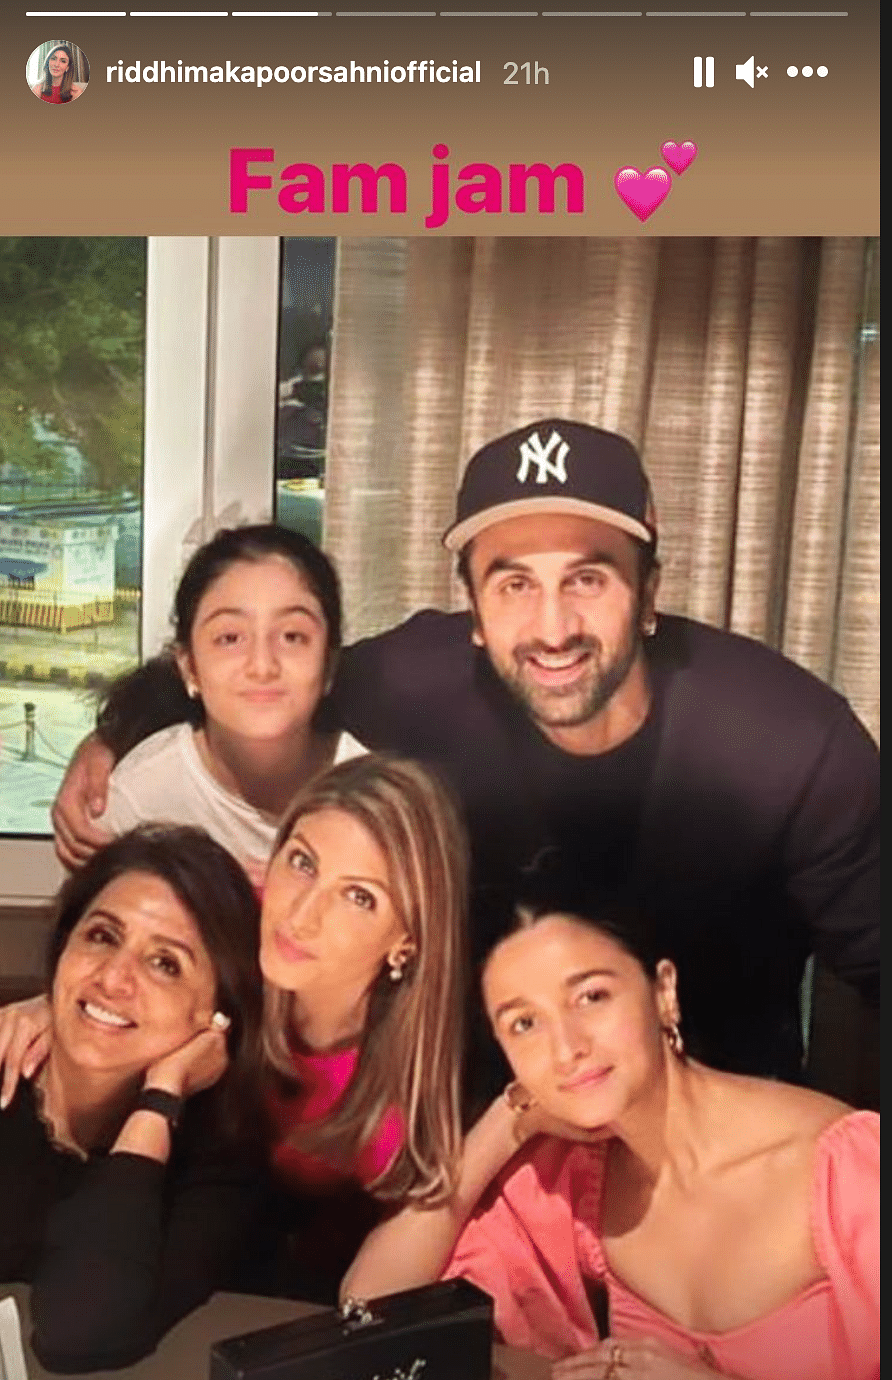 "My world", wrote Neetu Kapoor on Instagram as she shared a photo of a get-together with Alia, Ranbir.